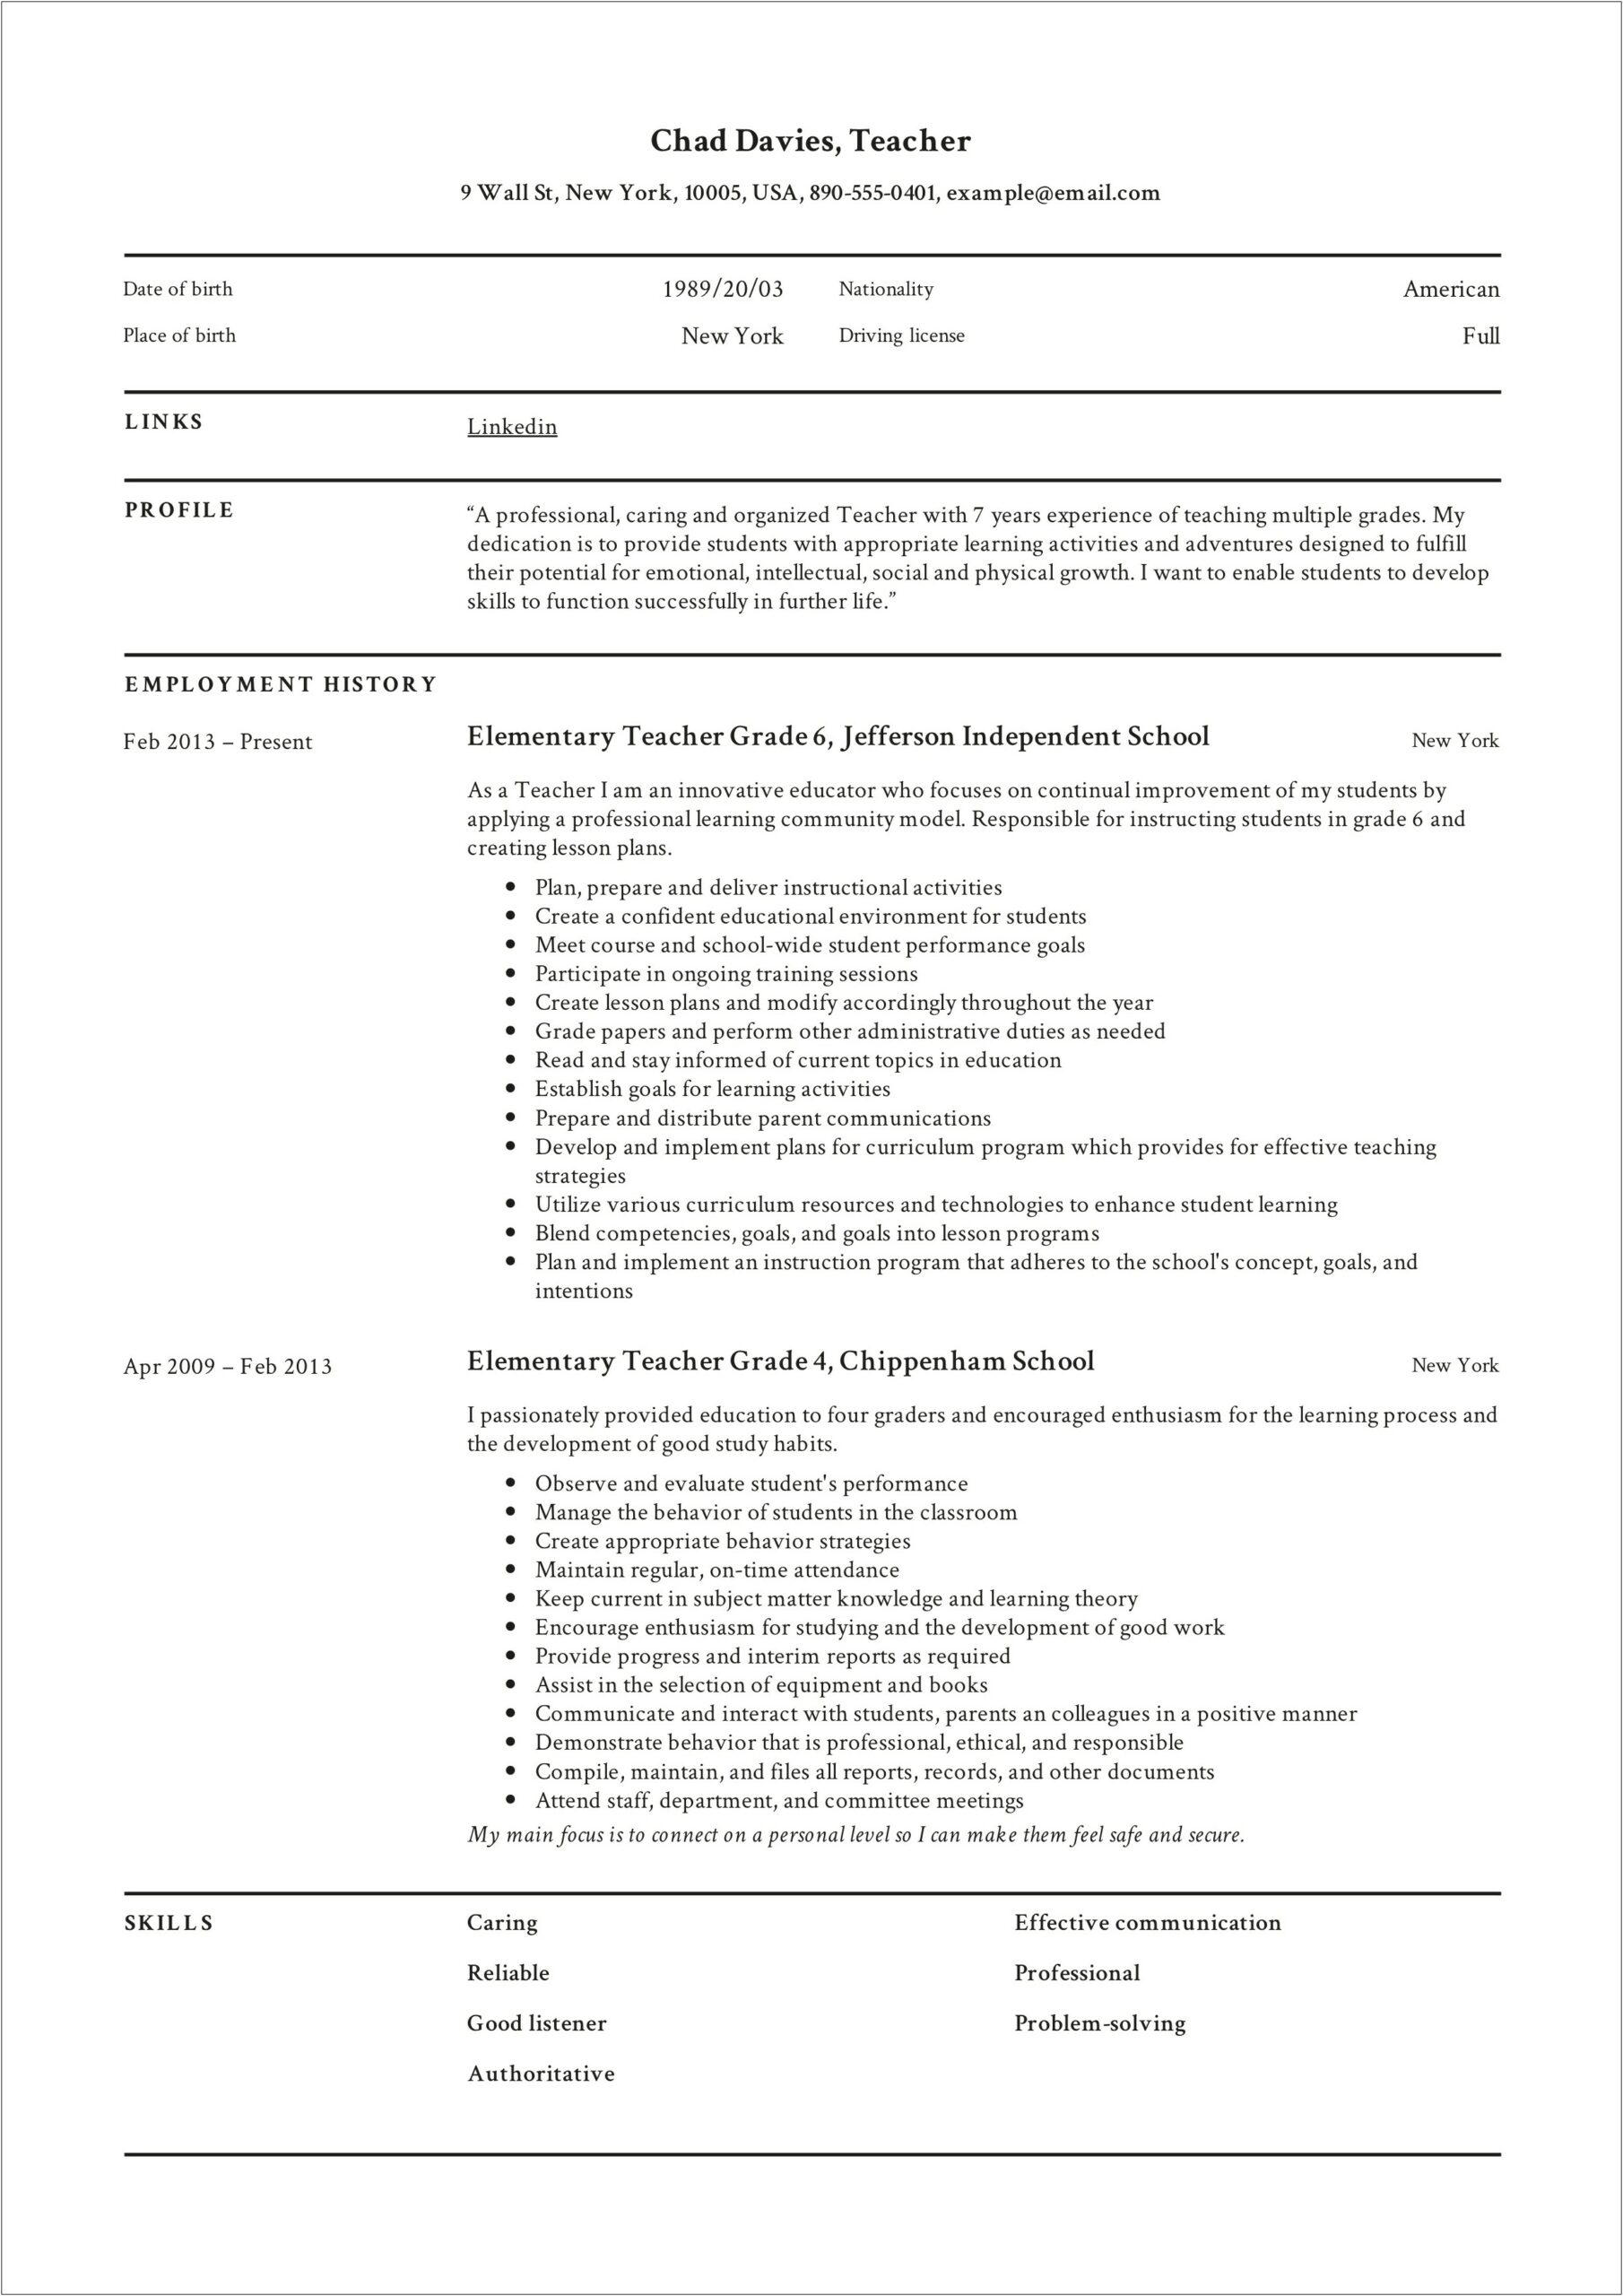 Resume Samples Download For Teachers With Experience